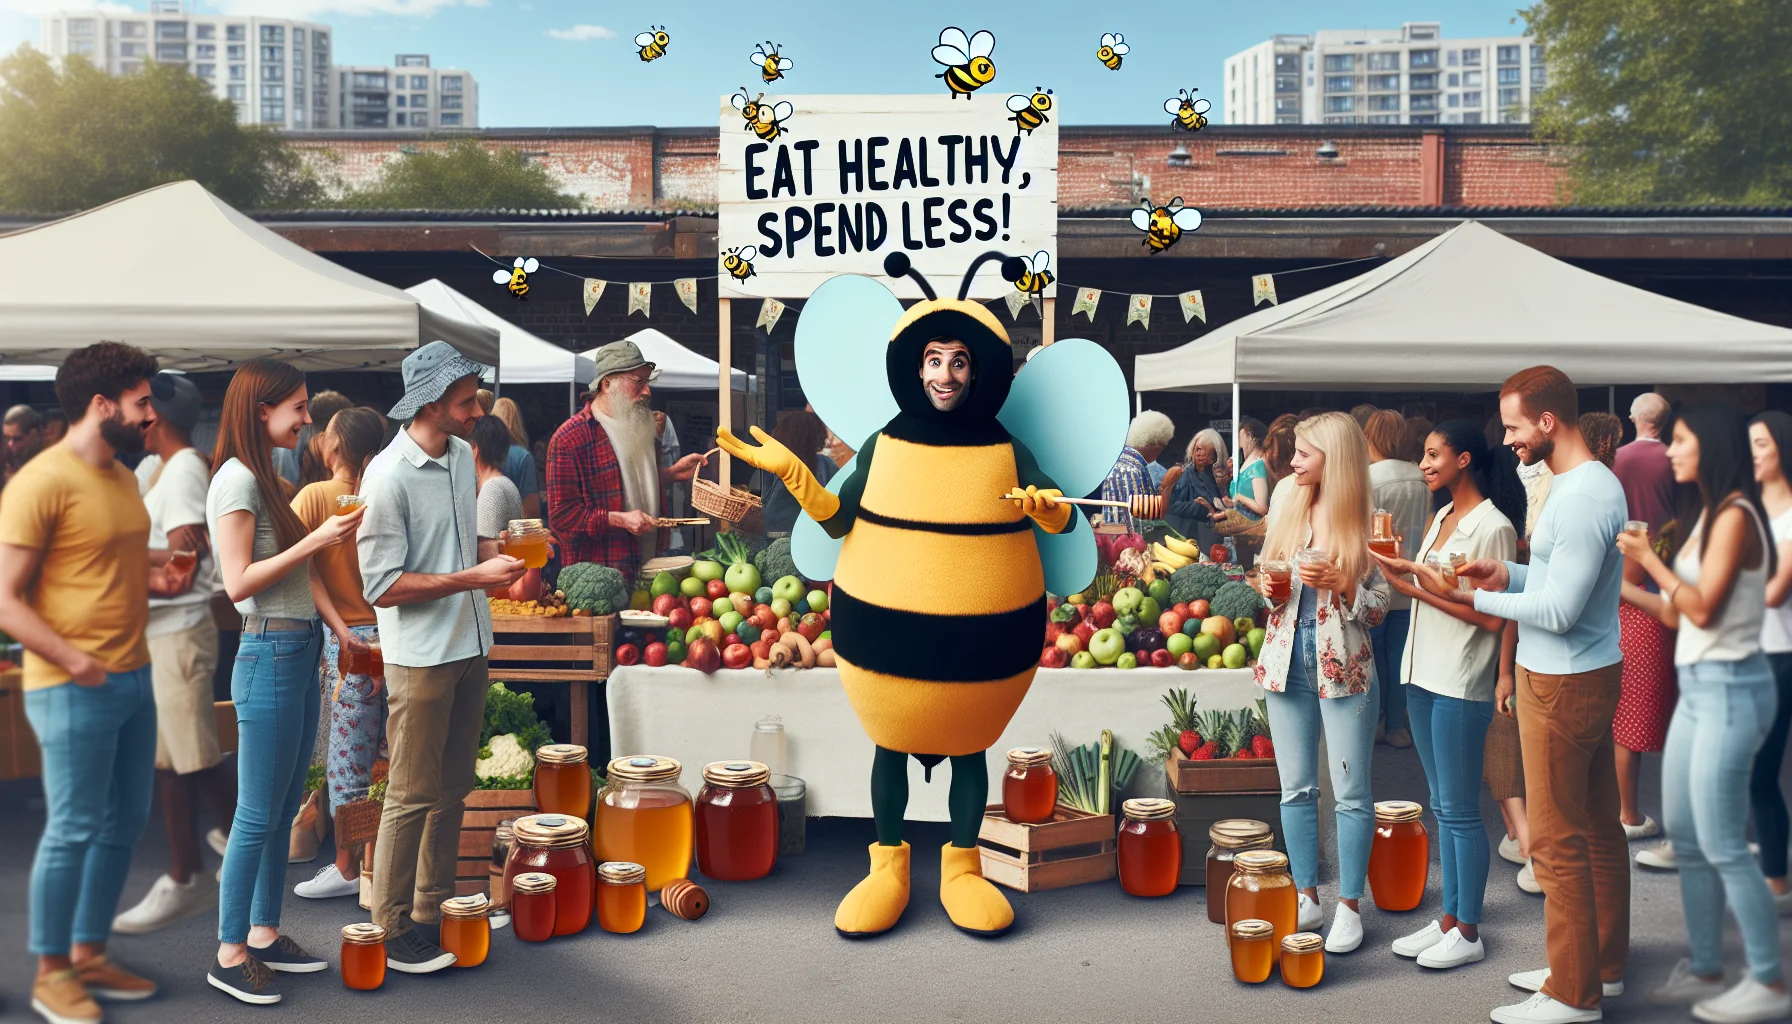 Generate a quirky and humorous image capturing the benefits and uses of raw honey. Picture a busy farmers market where a Caucasian man dressed as a giant honey bee is giving out honey samples to a diverse crowd. Include three stalls, decorated with vibrant fruits, vegetables, and raw honey jars. On the side, there's a large sign saying 'Eat Healthy, Spend Less!' with cute honeybees flying around it. The situation should feel light-hearted and inviting, enticing people to consume more raw honey and opt for a healthier, affordable lifestyle.